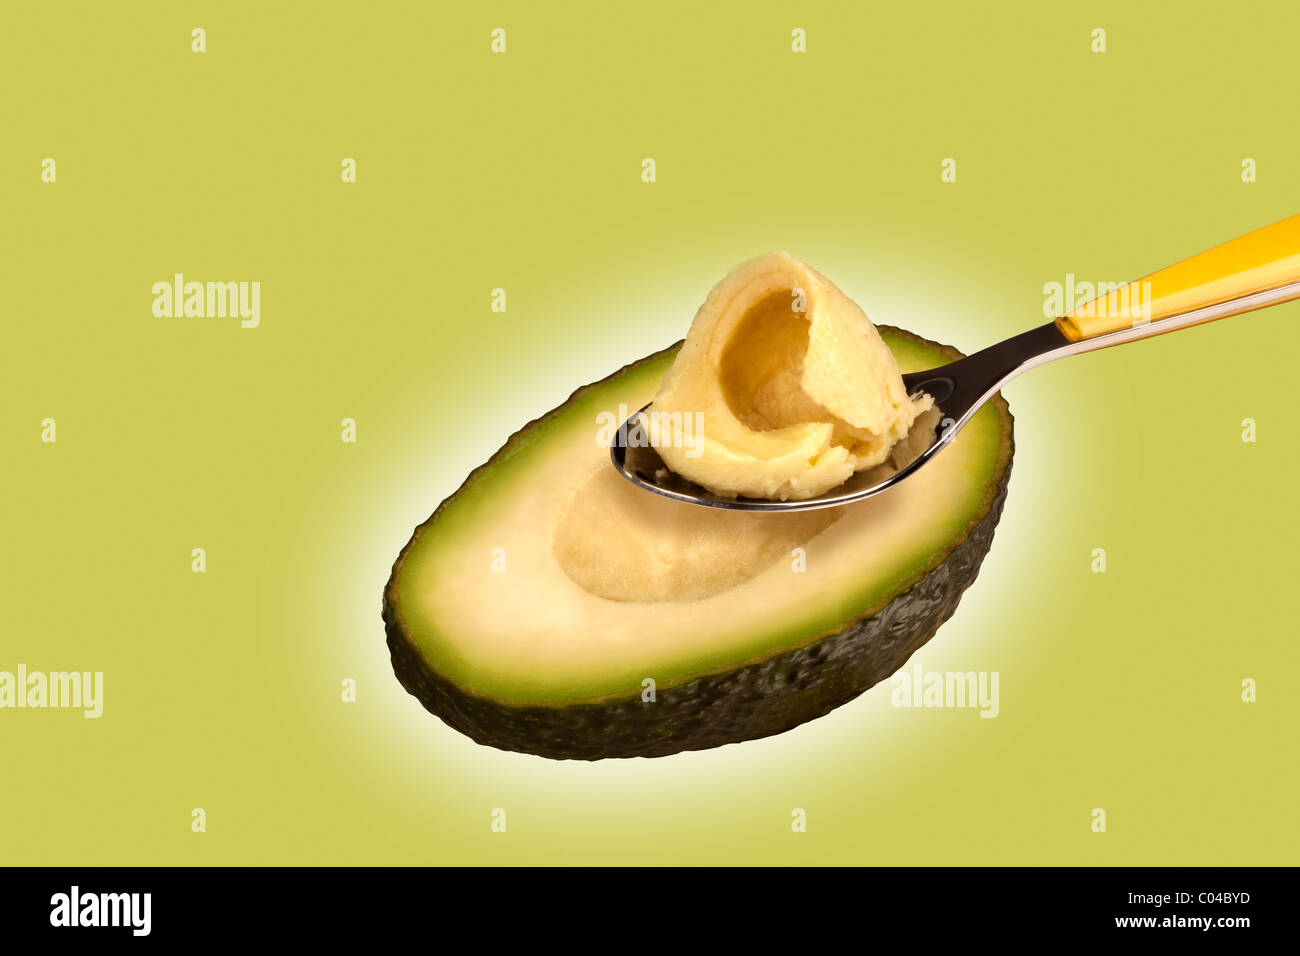 a avocado on a green background, with a spoon Stock Photo